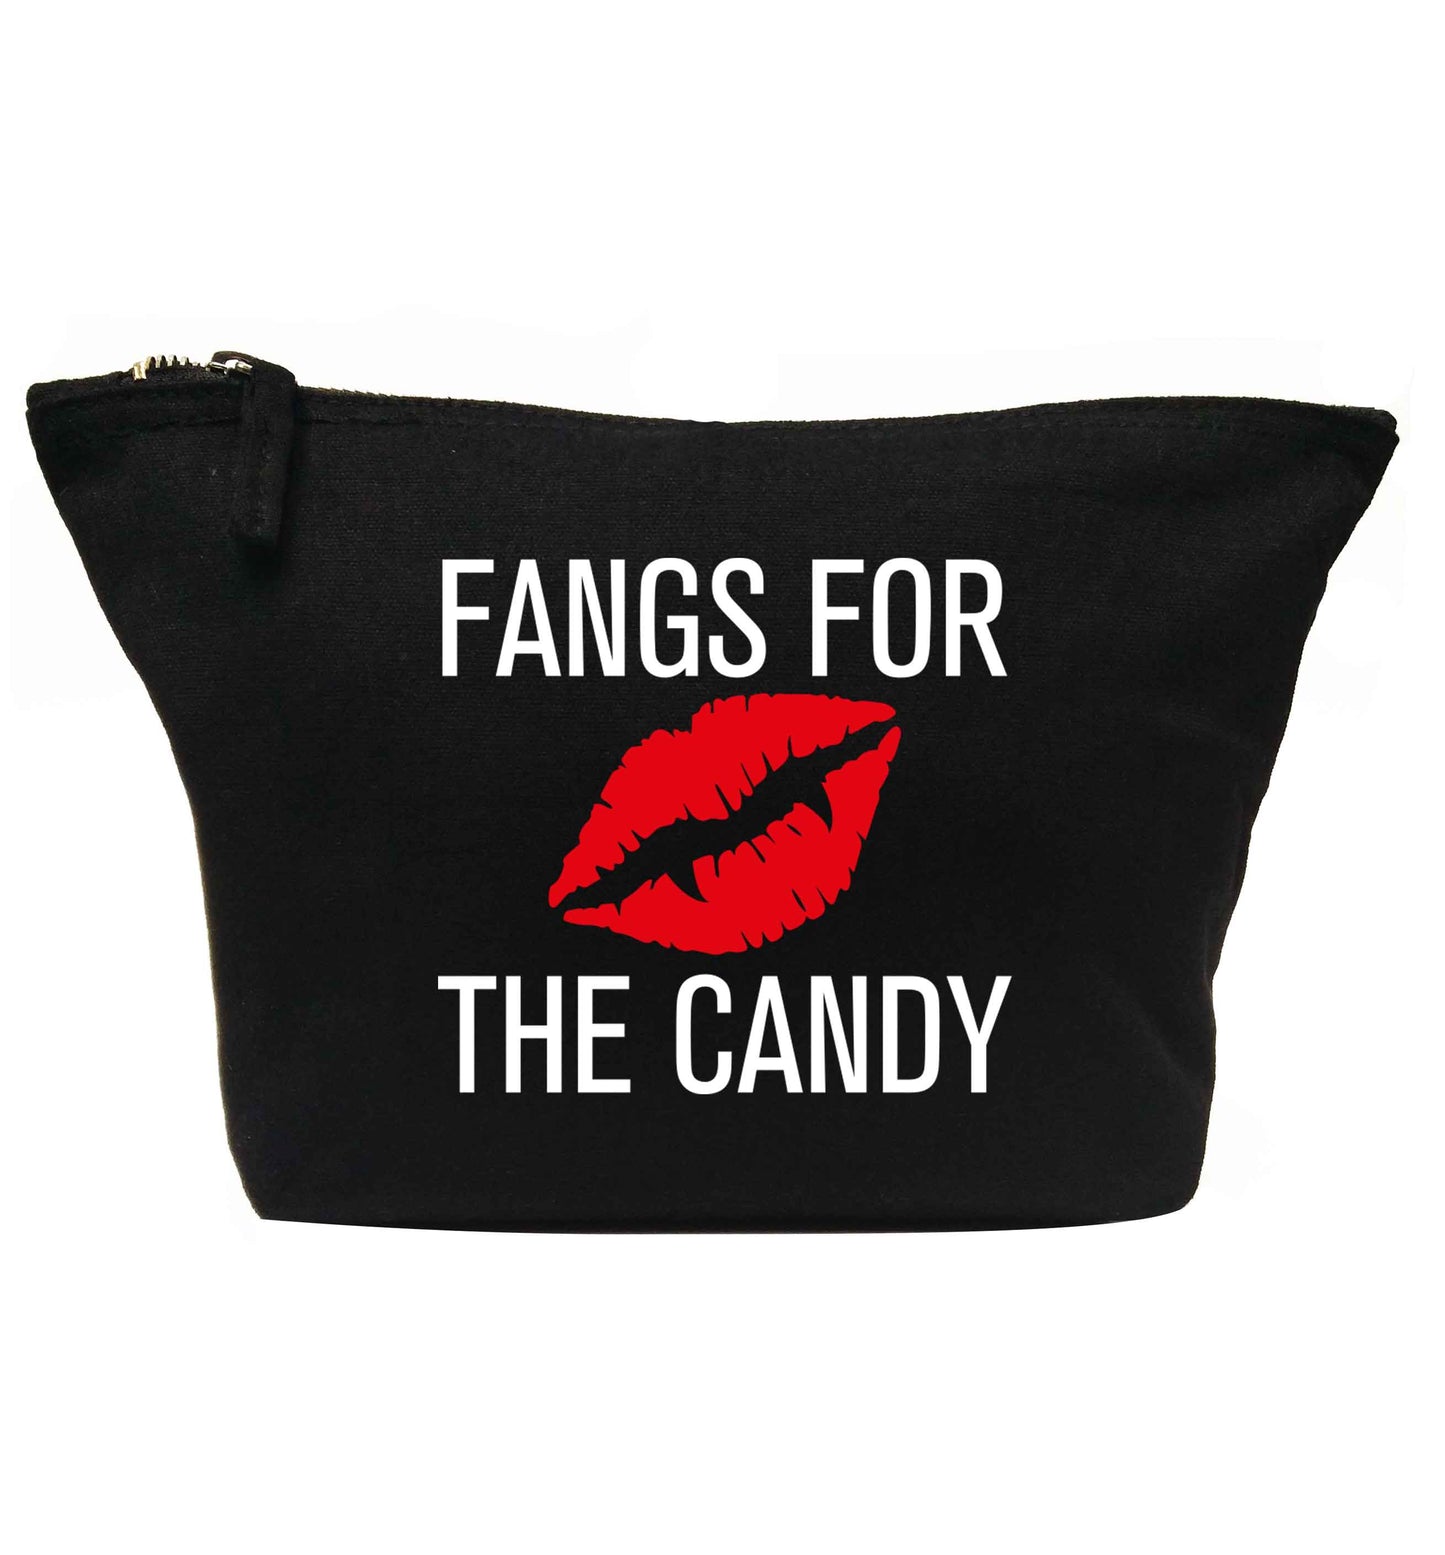 Fangs for the candy | Makeup / wash bag